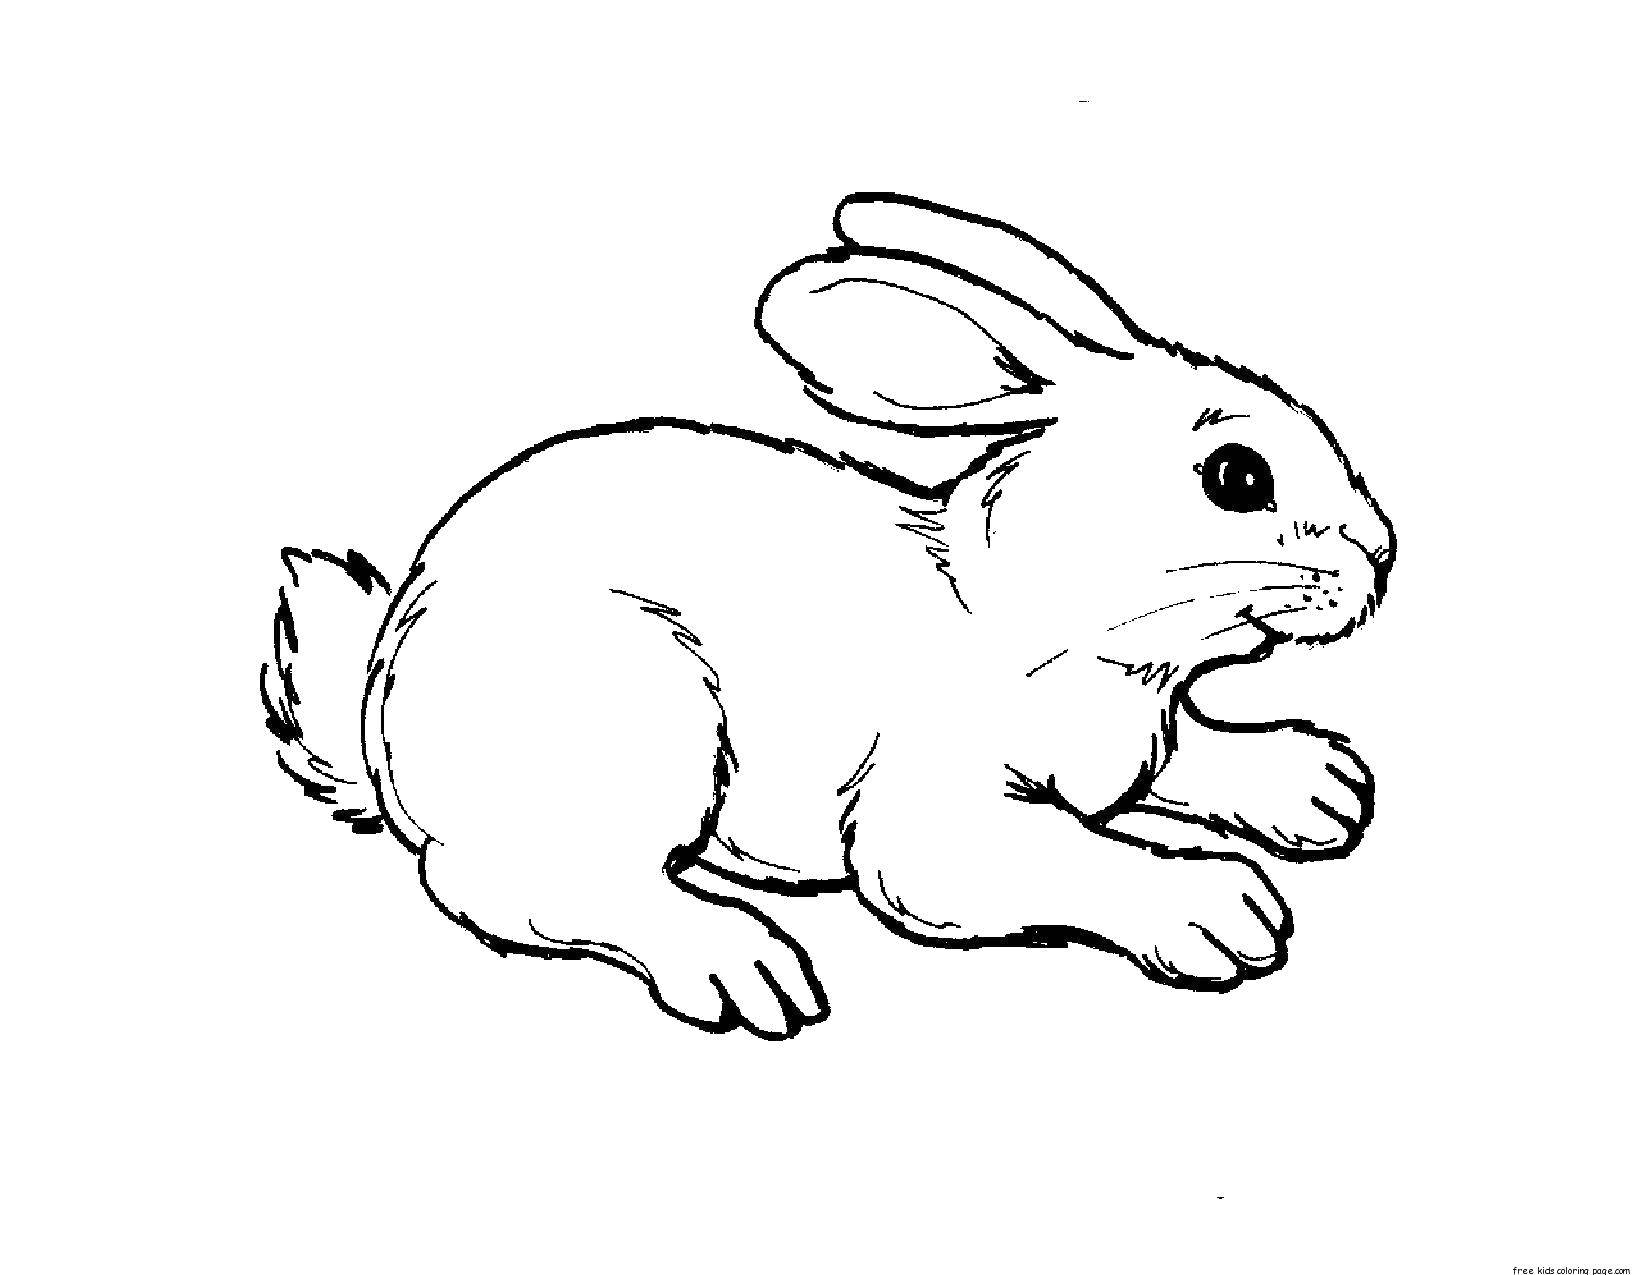 Coloring Cowardly hare. Category animals. Tags:  Animals, Bunny.